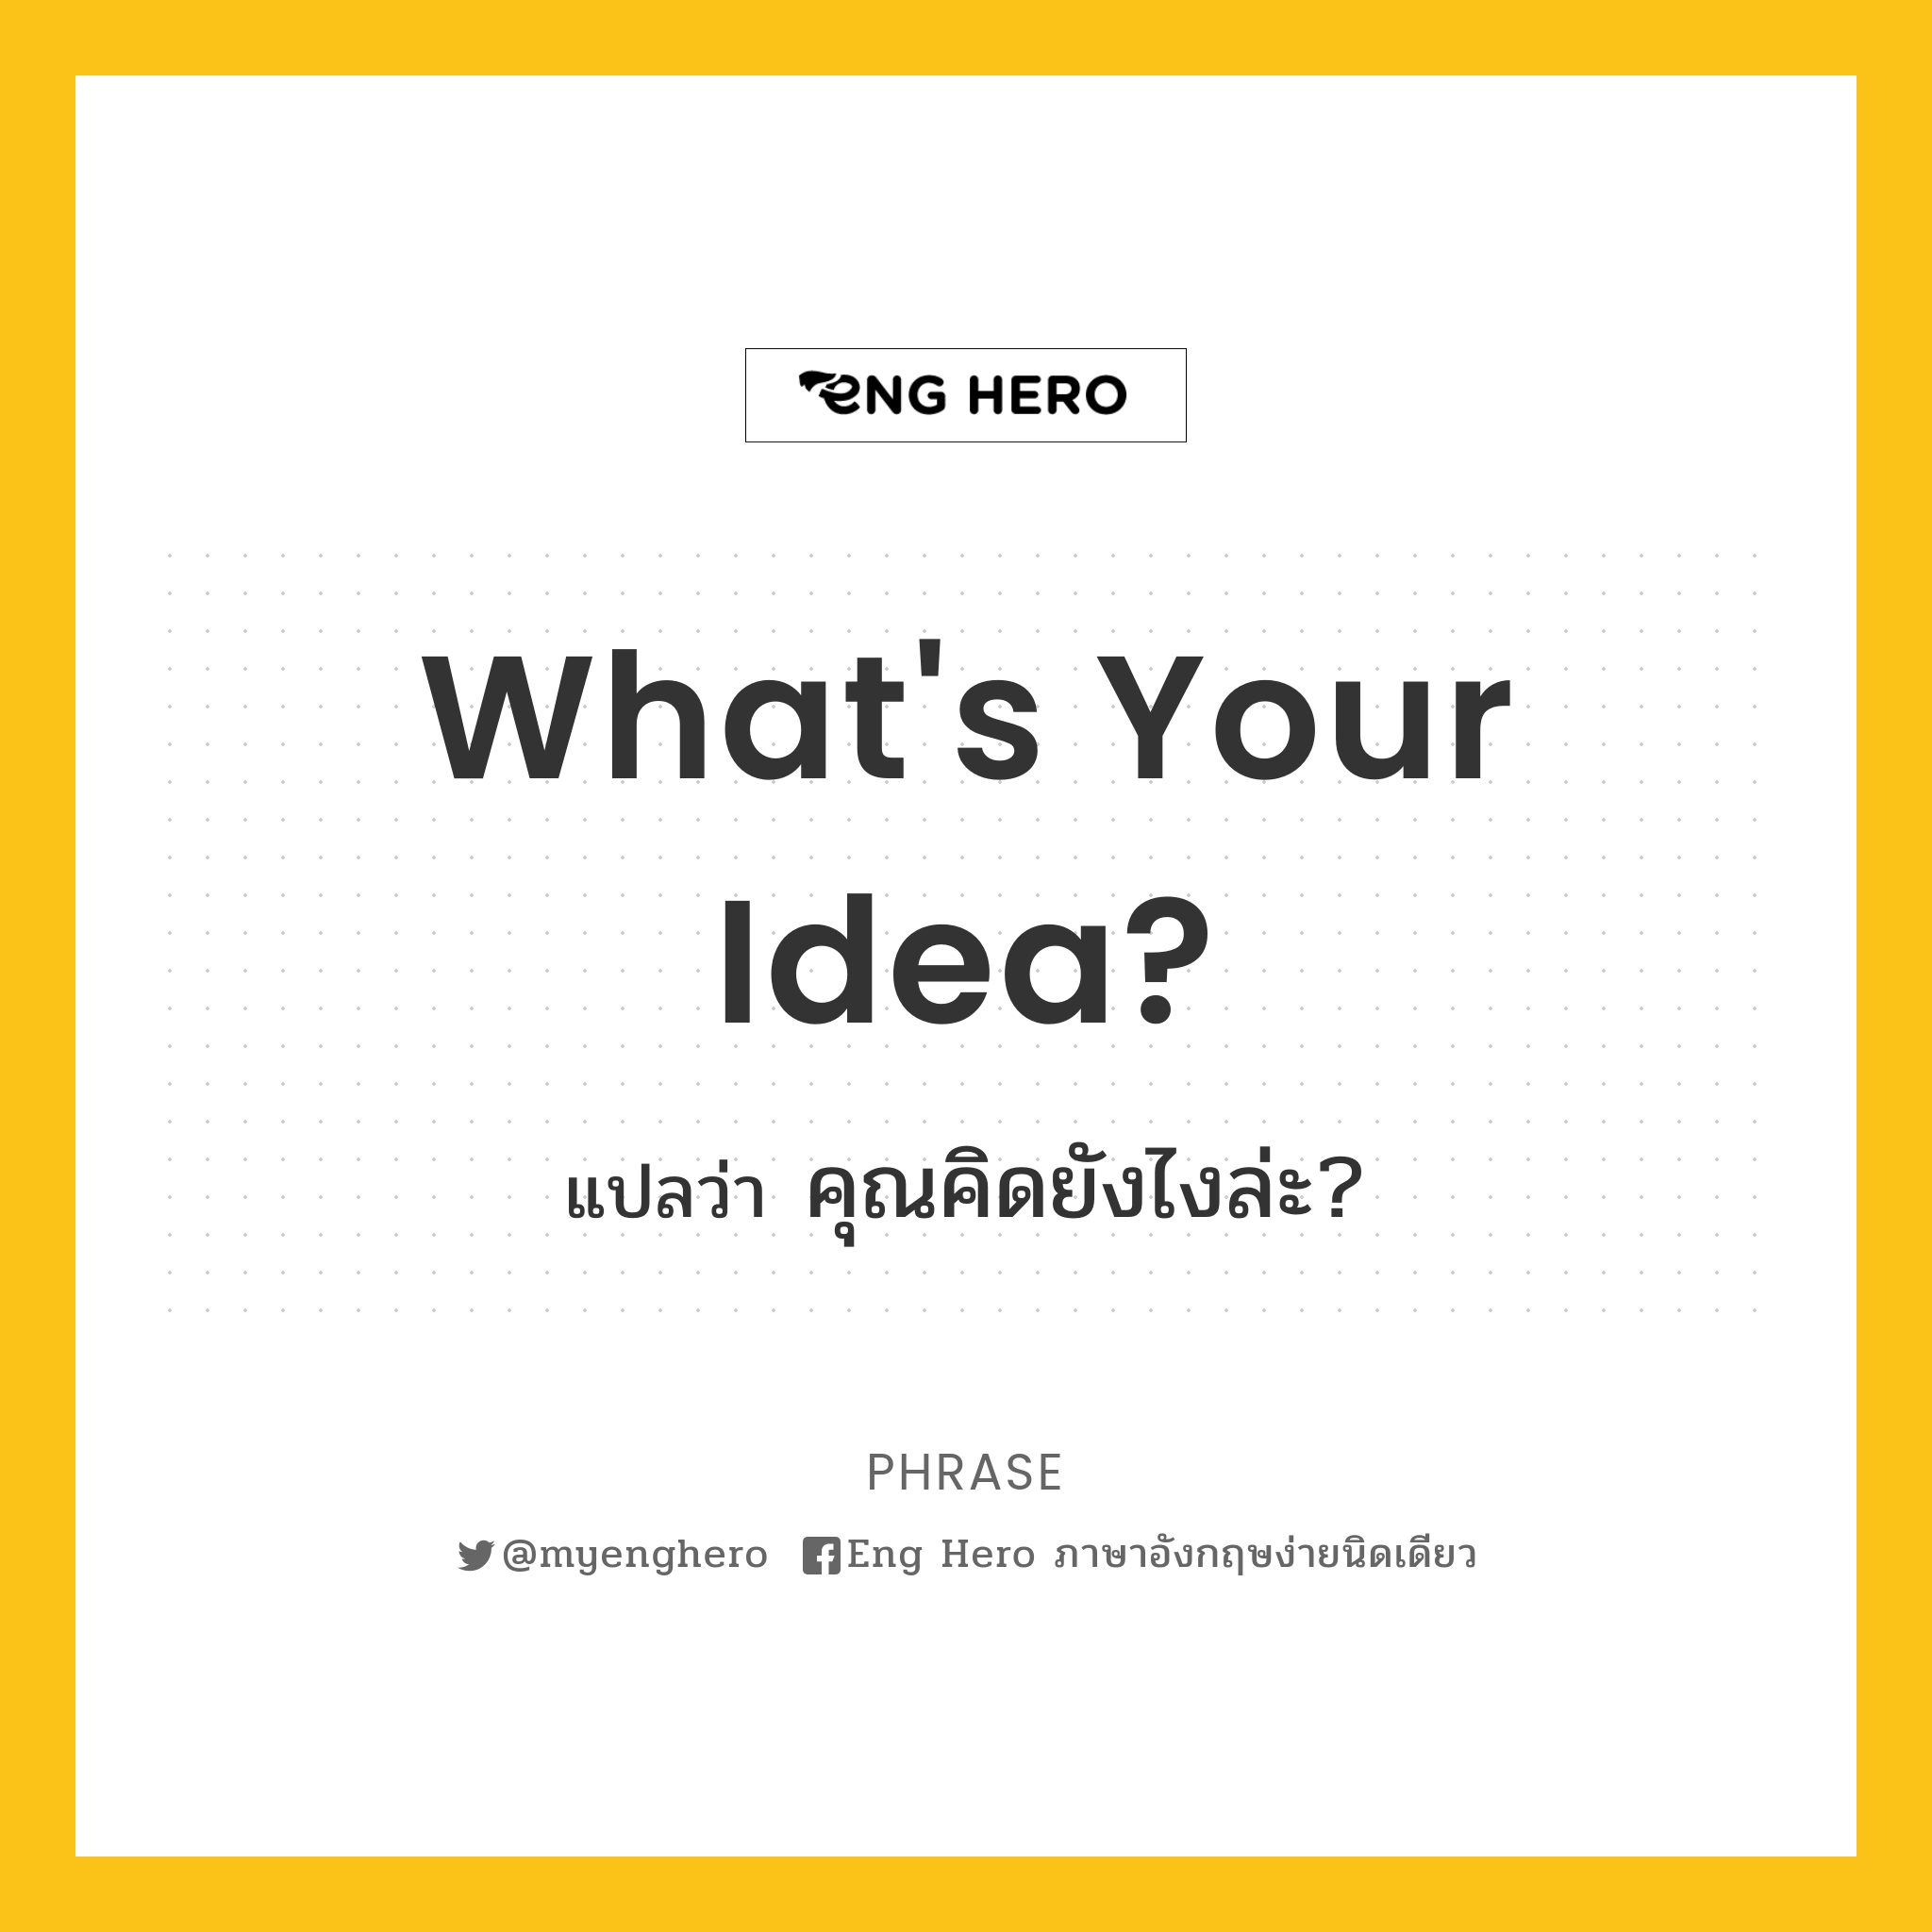 What's your idea?